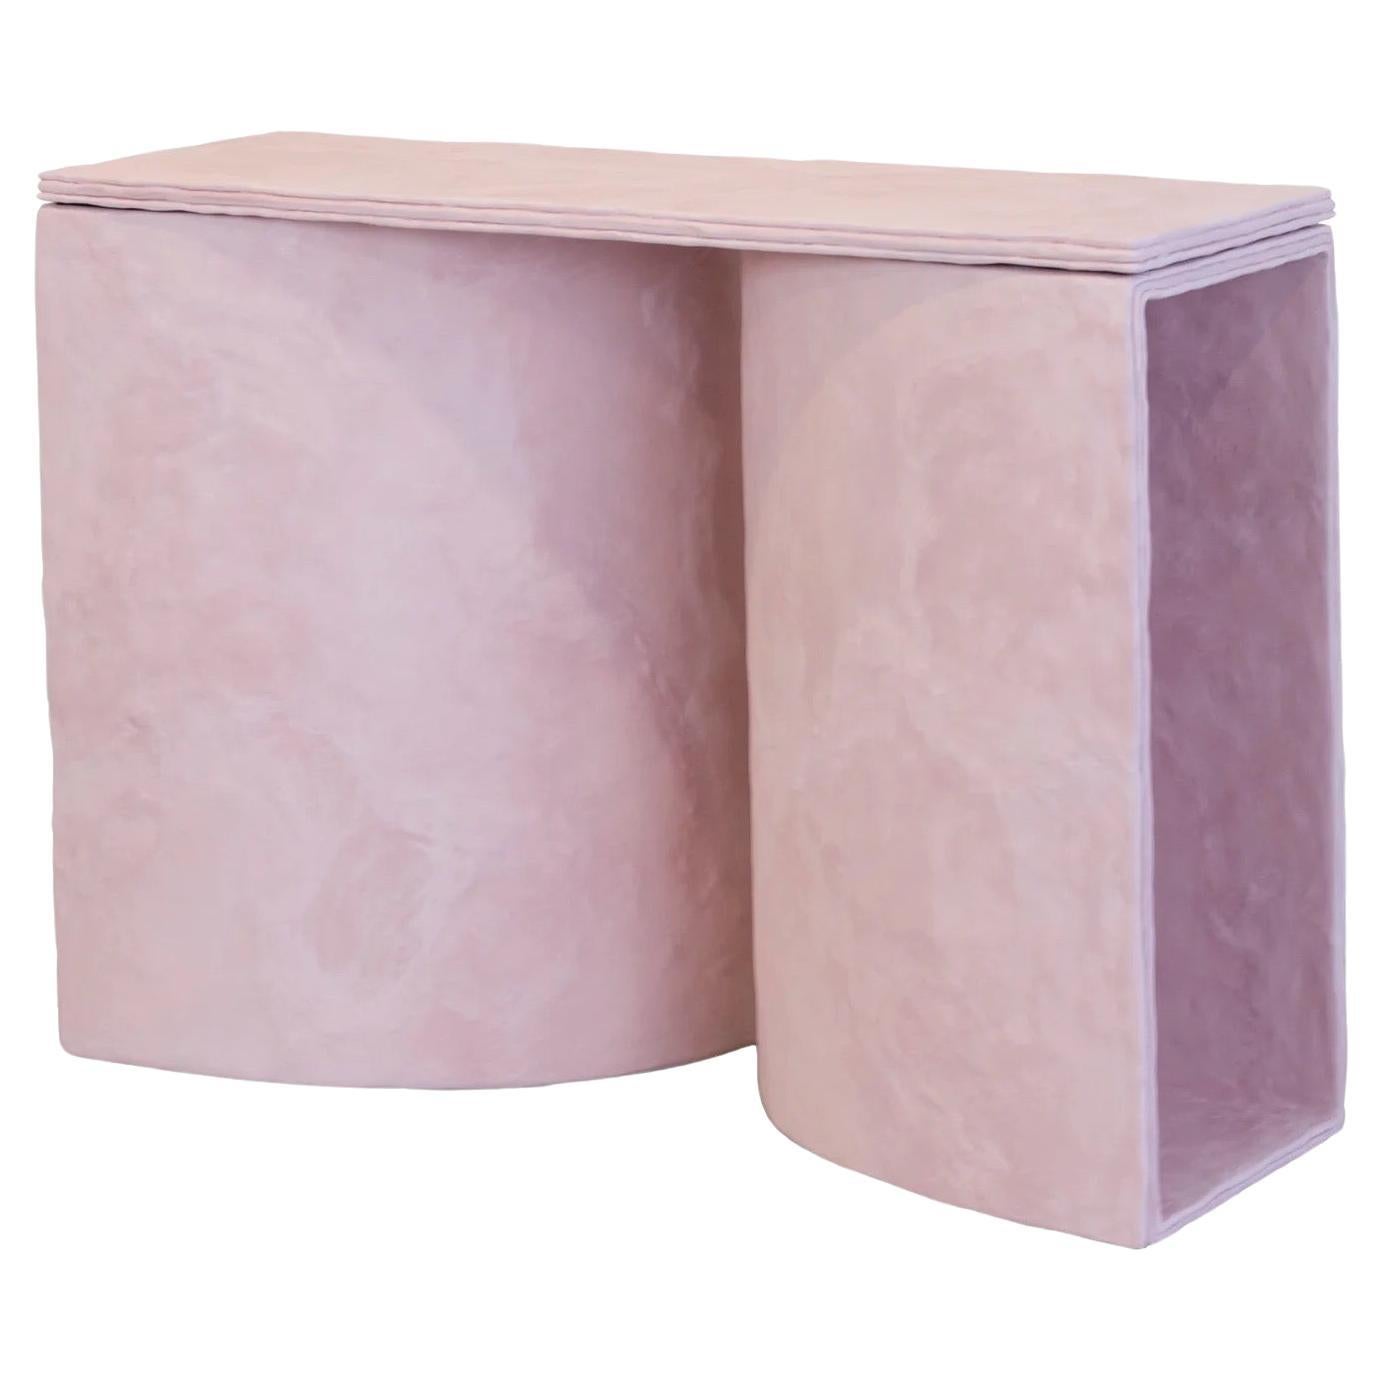 PLANE Console/Console Table Pink Cement by Bailey Fontaine REPby Tuleste Factory